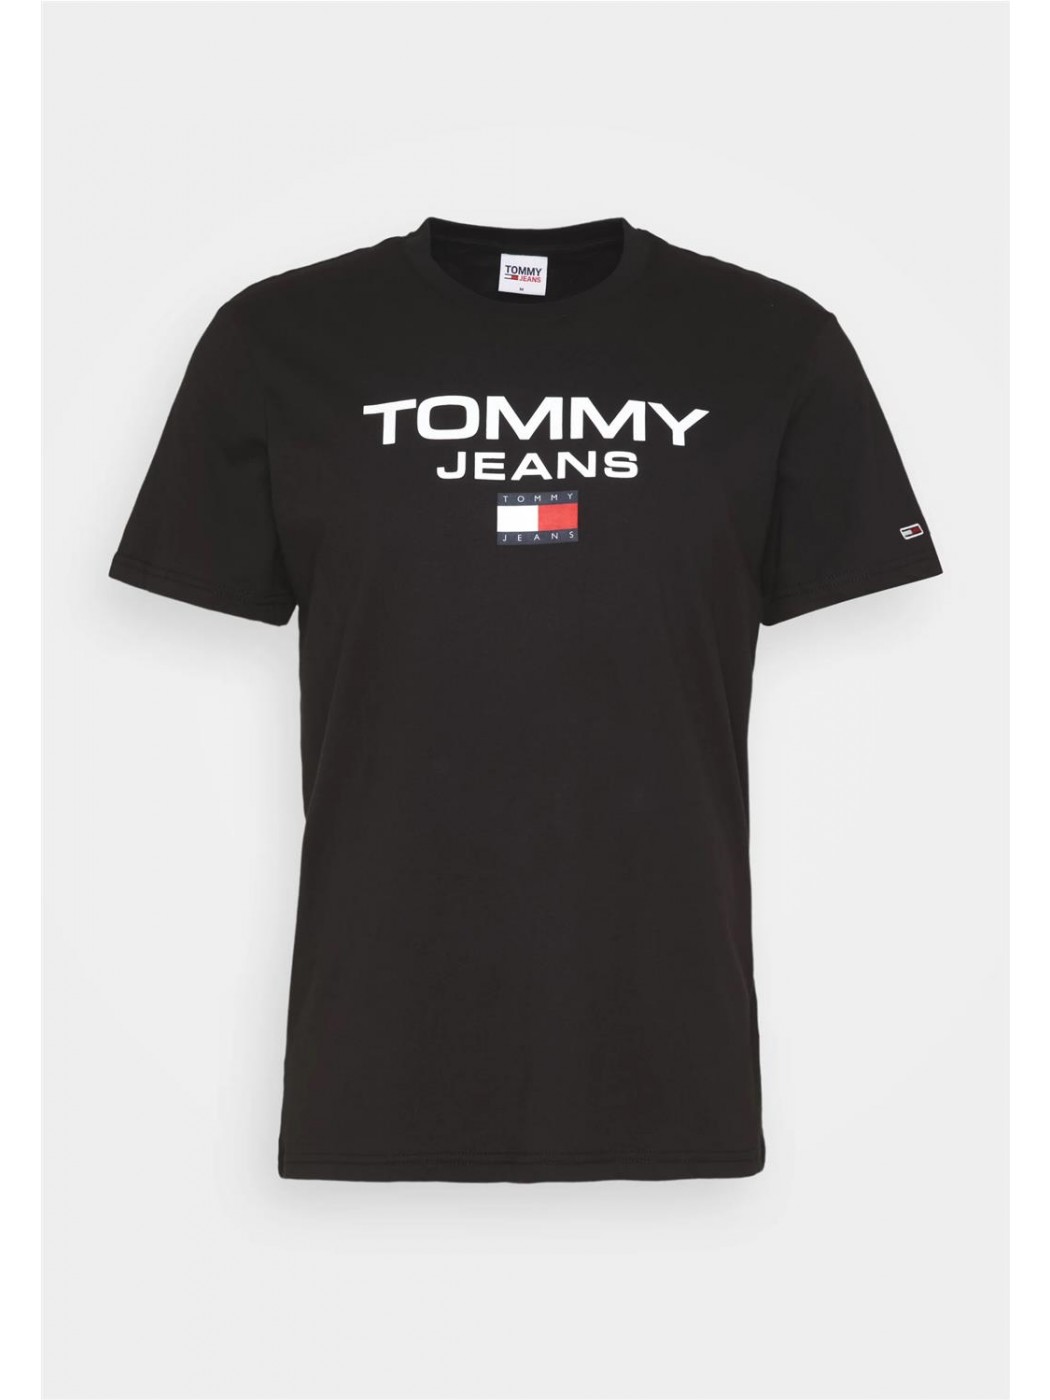 CAMISETA TOMMY JEANS HOMBRE...